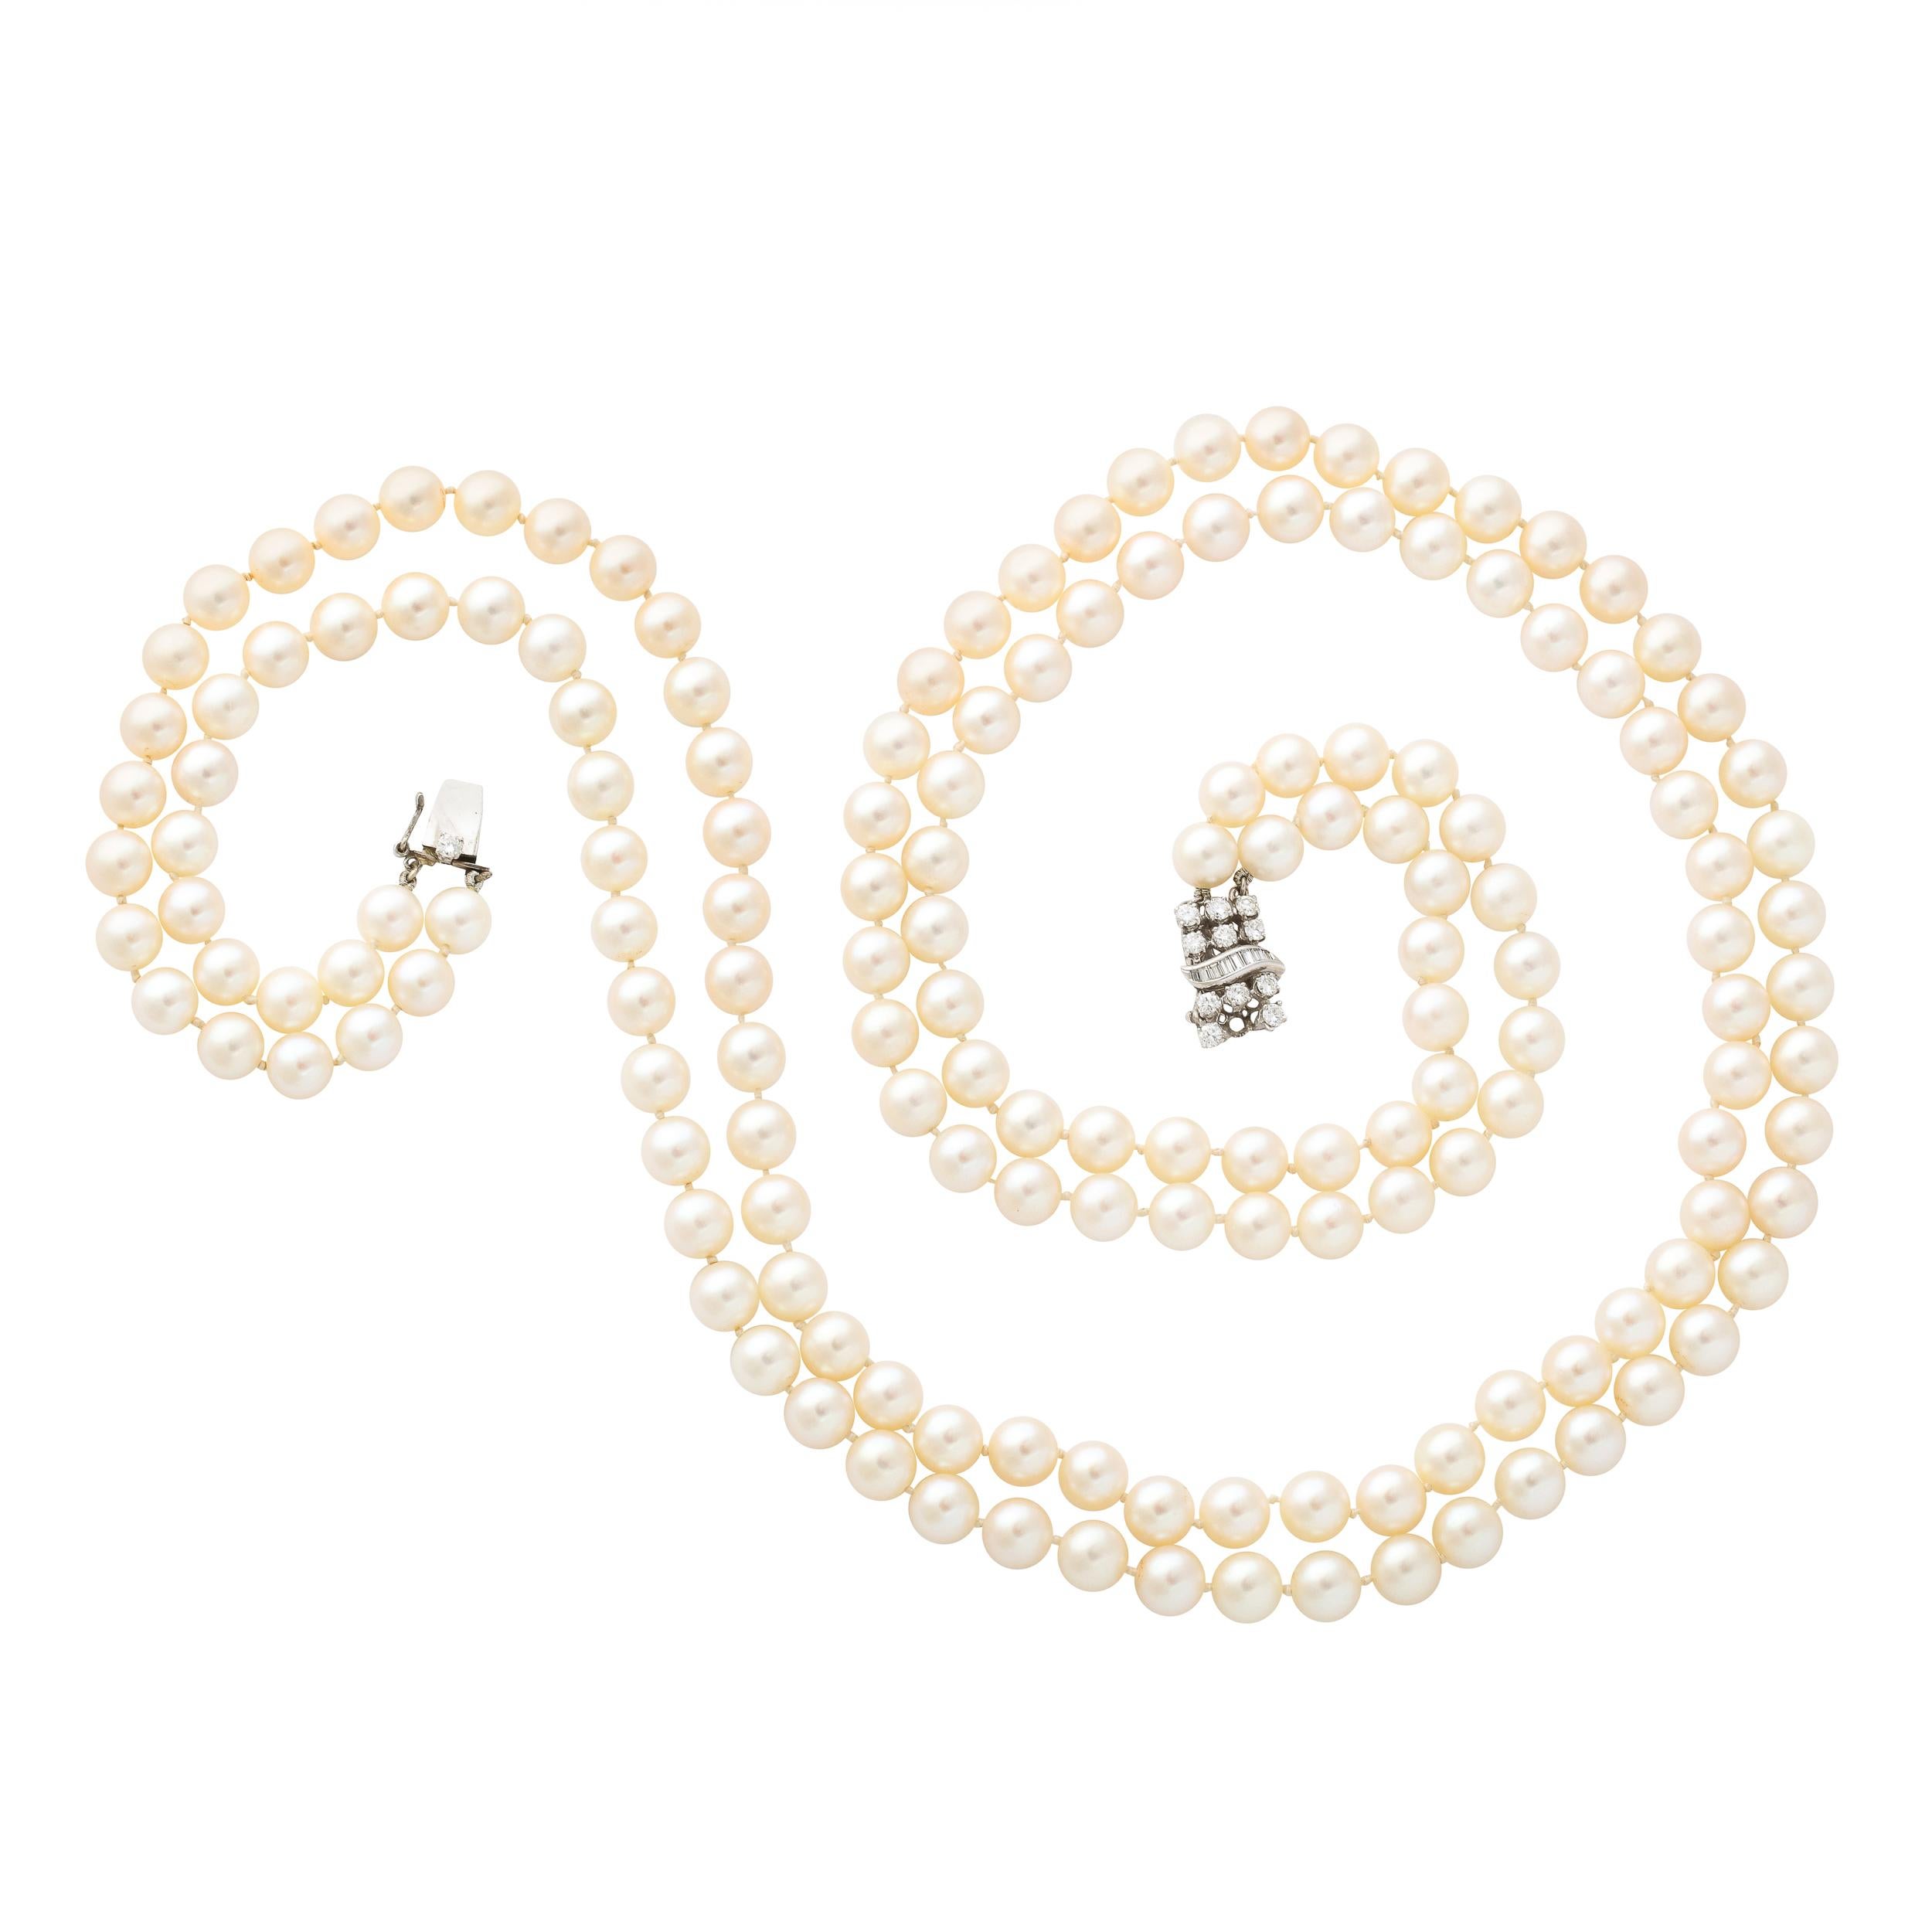 This elegant double strand pearl necklace is made of 170 7 mm cultured pearls of fine quality with a slightly rose luster and fitted with a diamond and 14k white gold clasp set with 12 round brilliant cut diamonds of approximately 1/3 carat and also